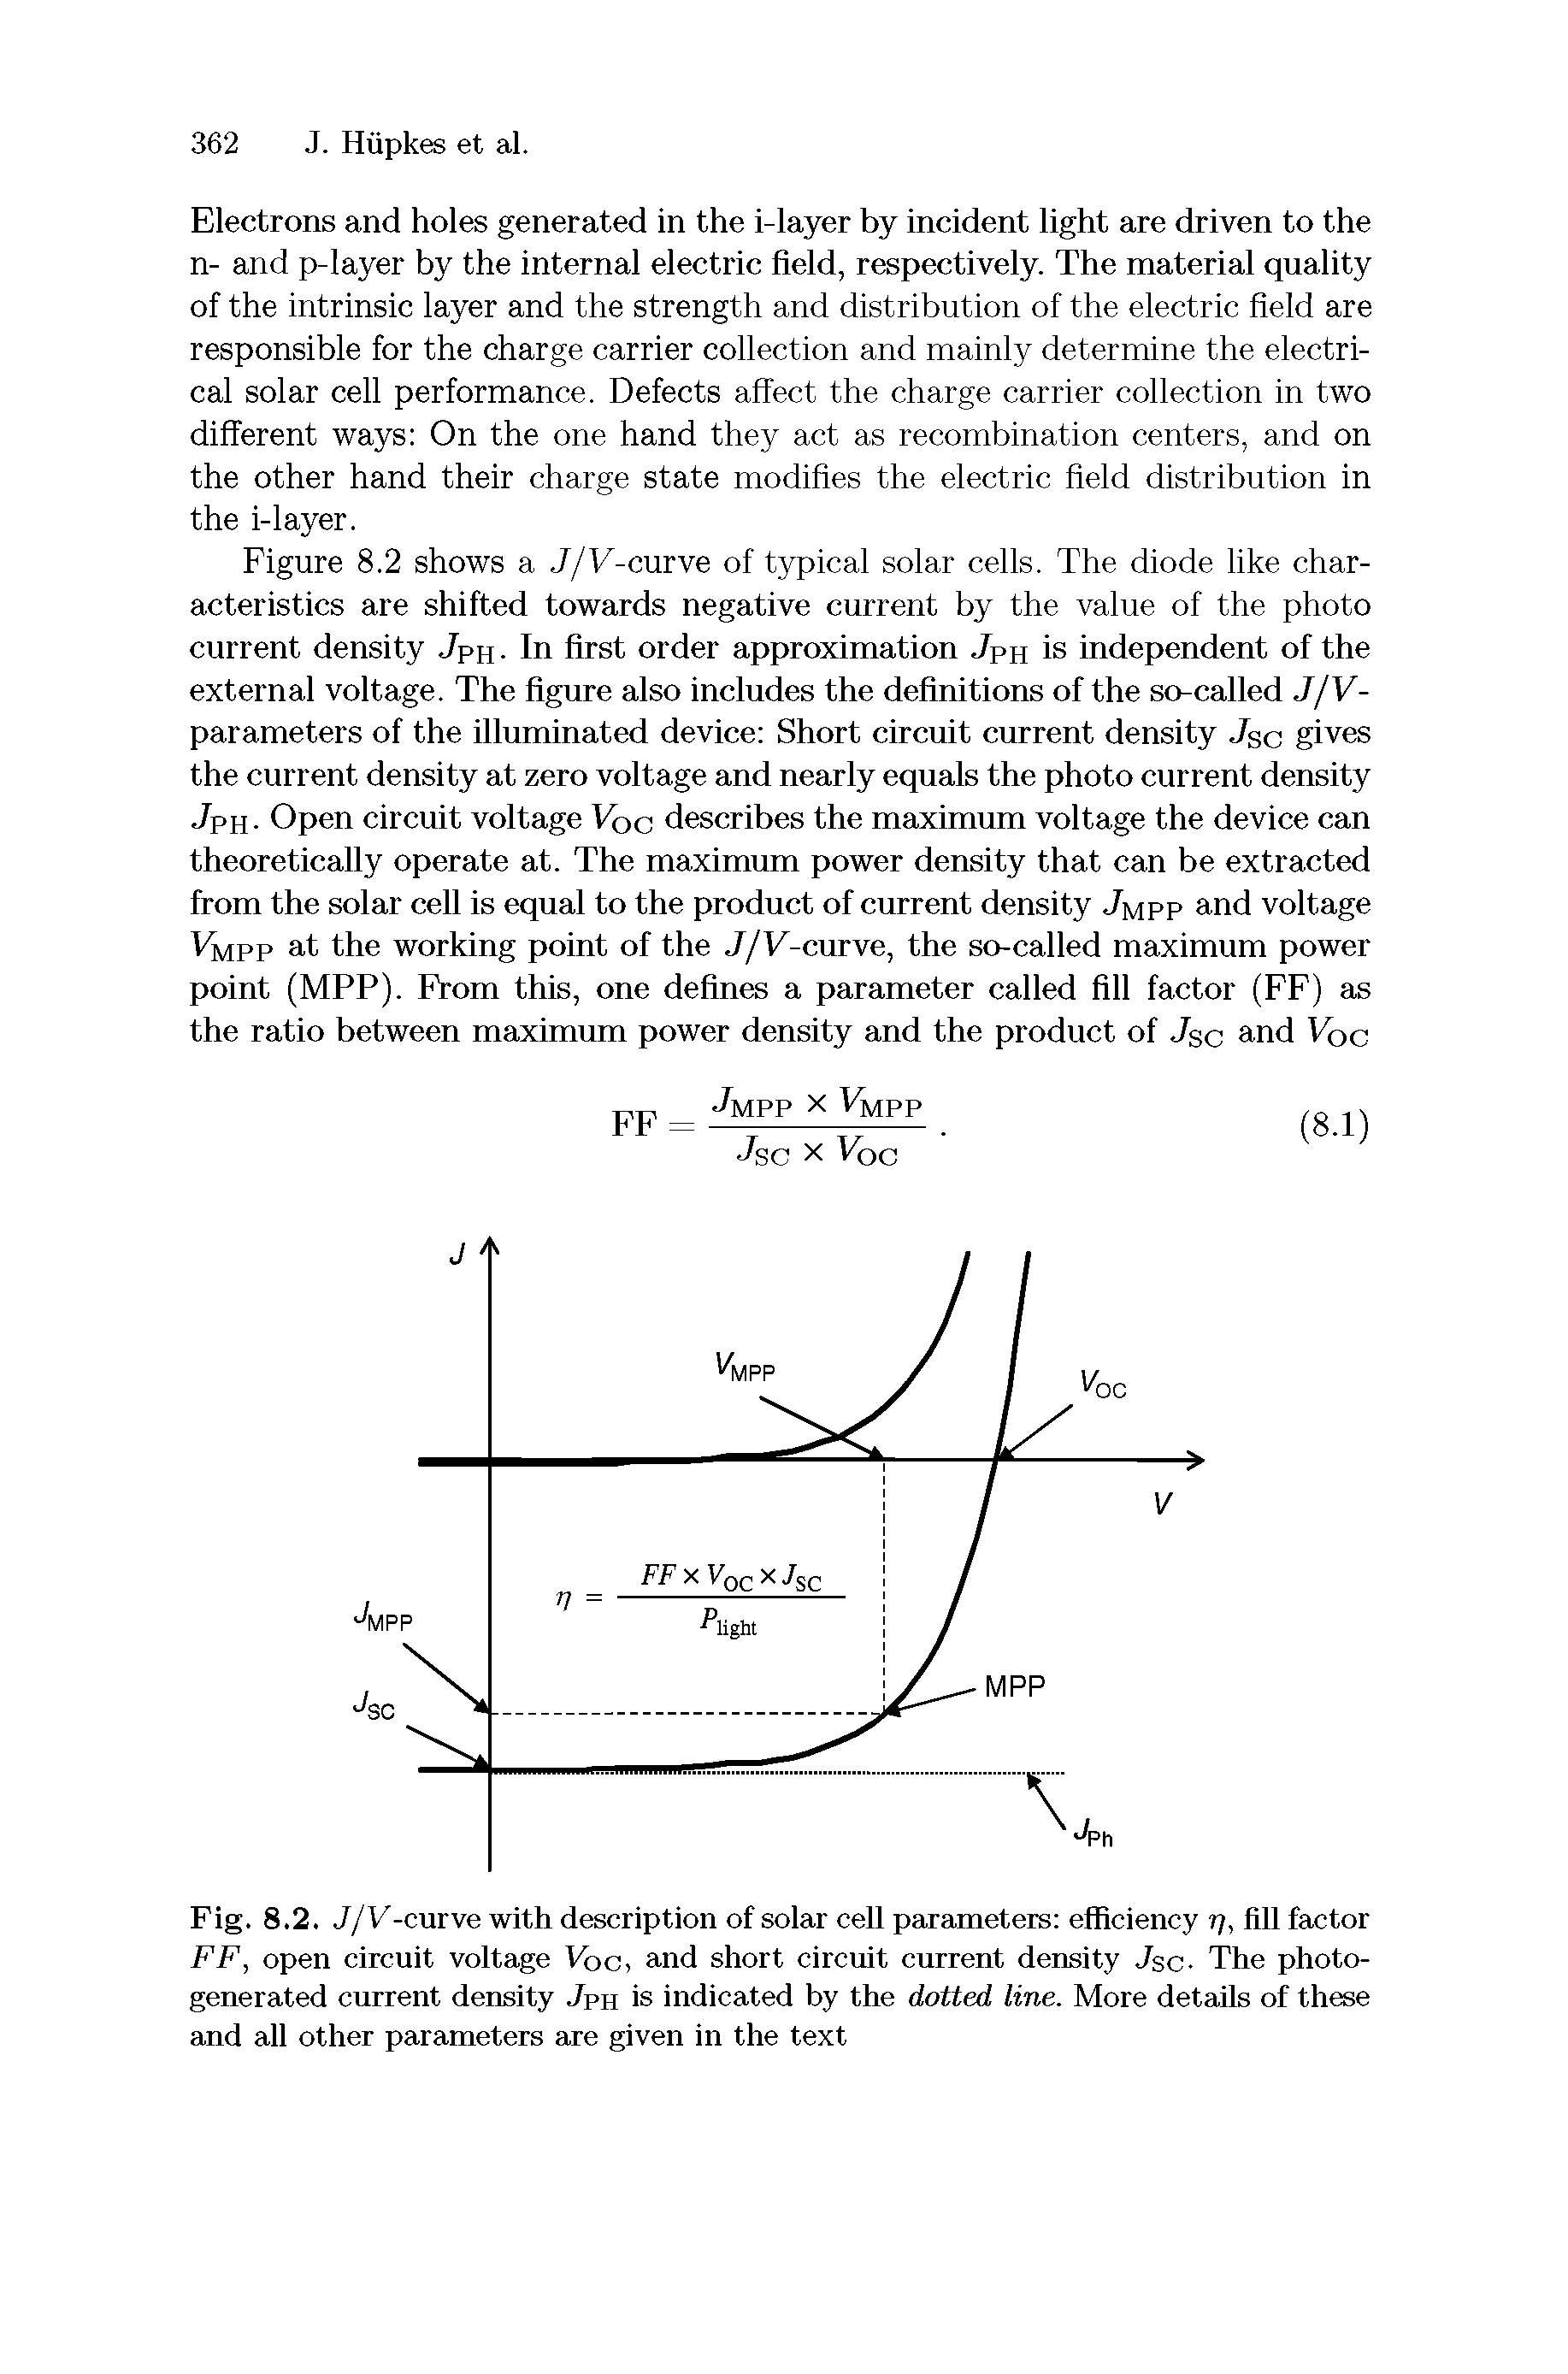 Fig. 8.2. J/V-curve with description of solar cell parameters efficiency /, fill factor FF, open circuit voltage Voc, and short circuit current density Jsc- The photogenerated current density Jph is indicated by the dotted line. More details of these and all other parameters are given in the text...